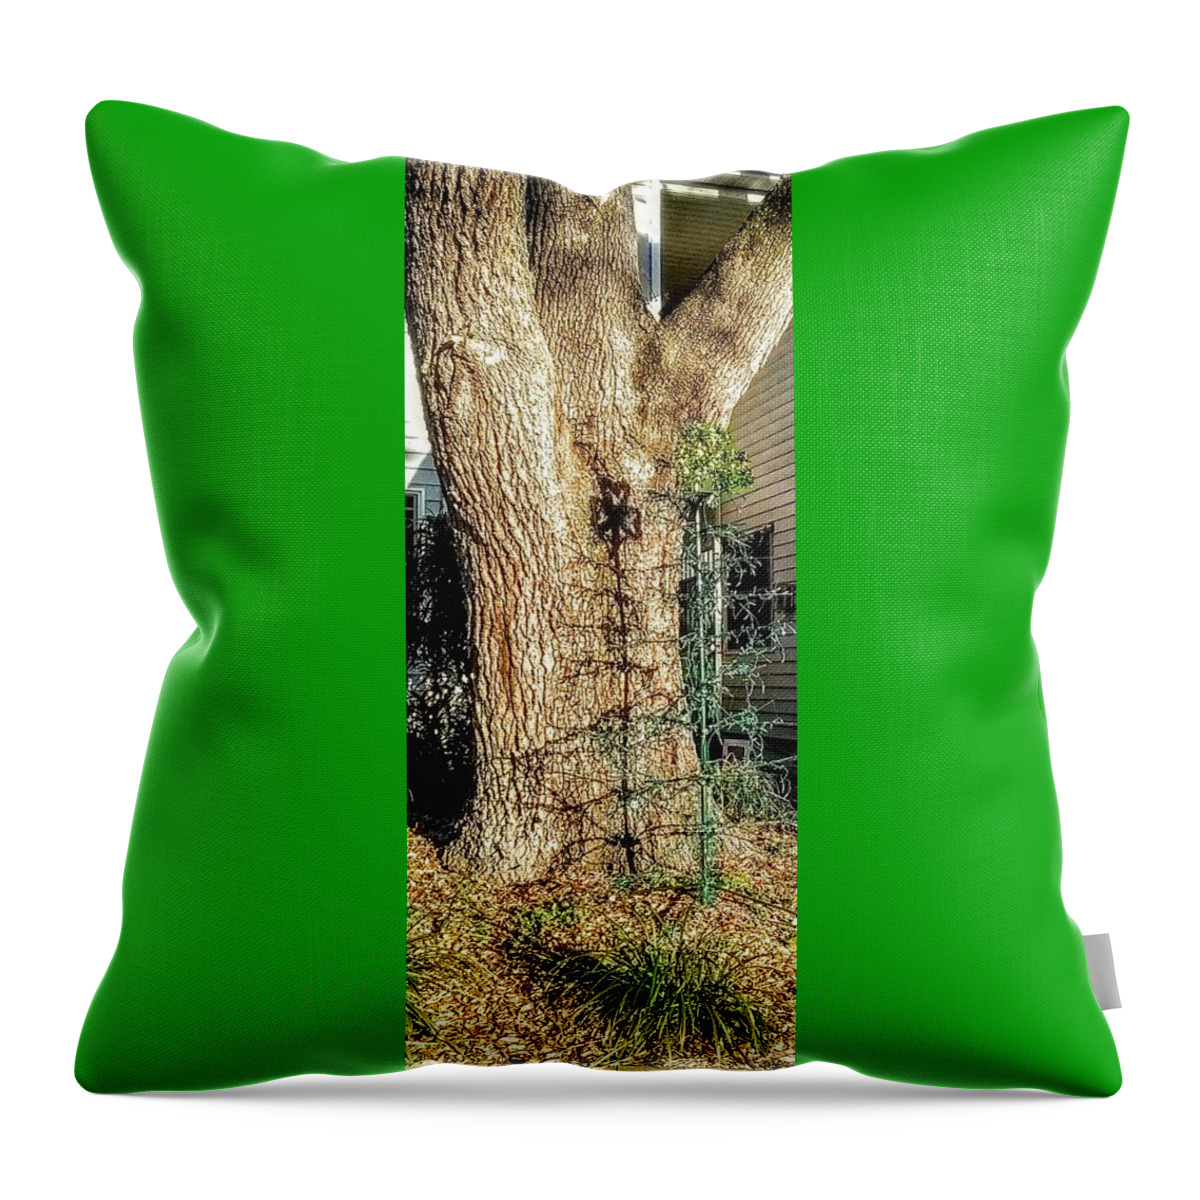 Shamrock Throw Pillow featuring the photograph Reflections by Suzanne Berthier